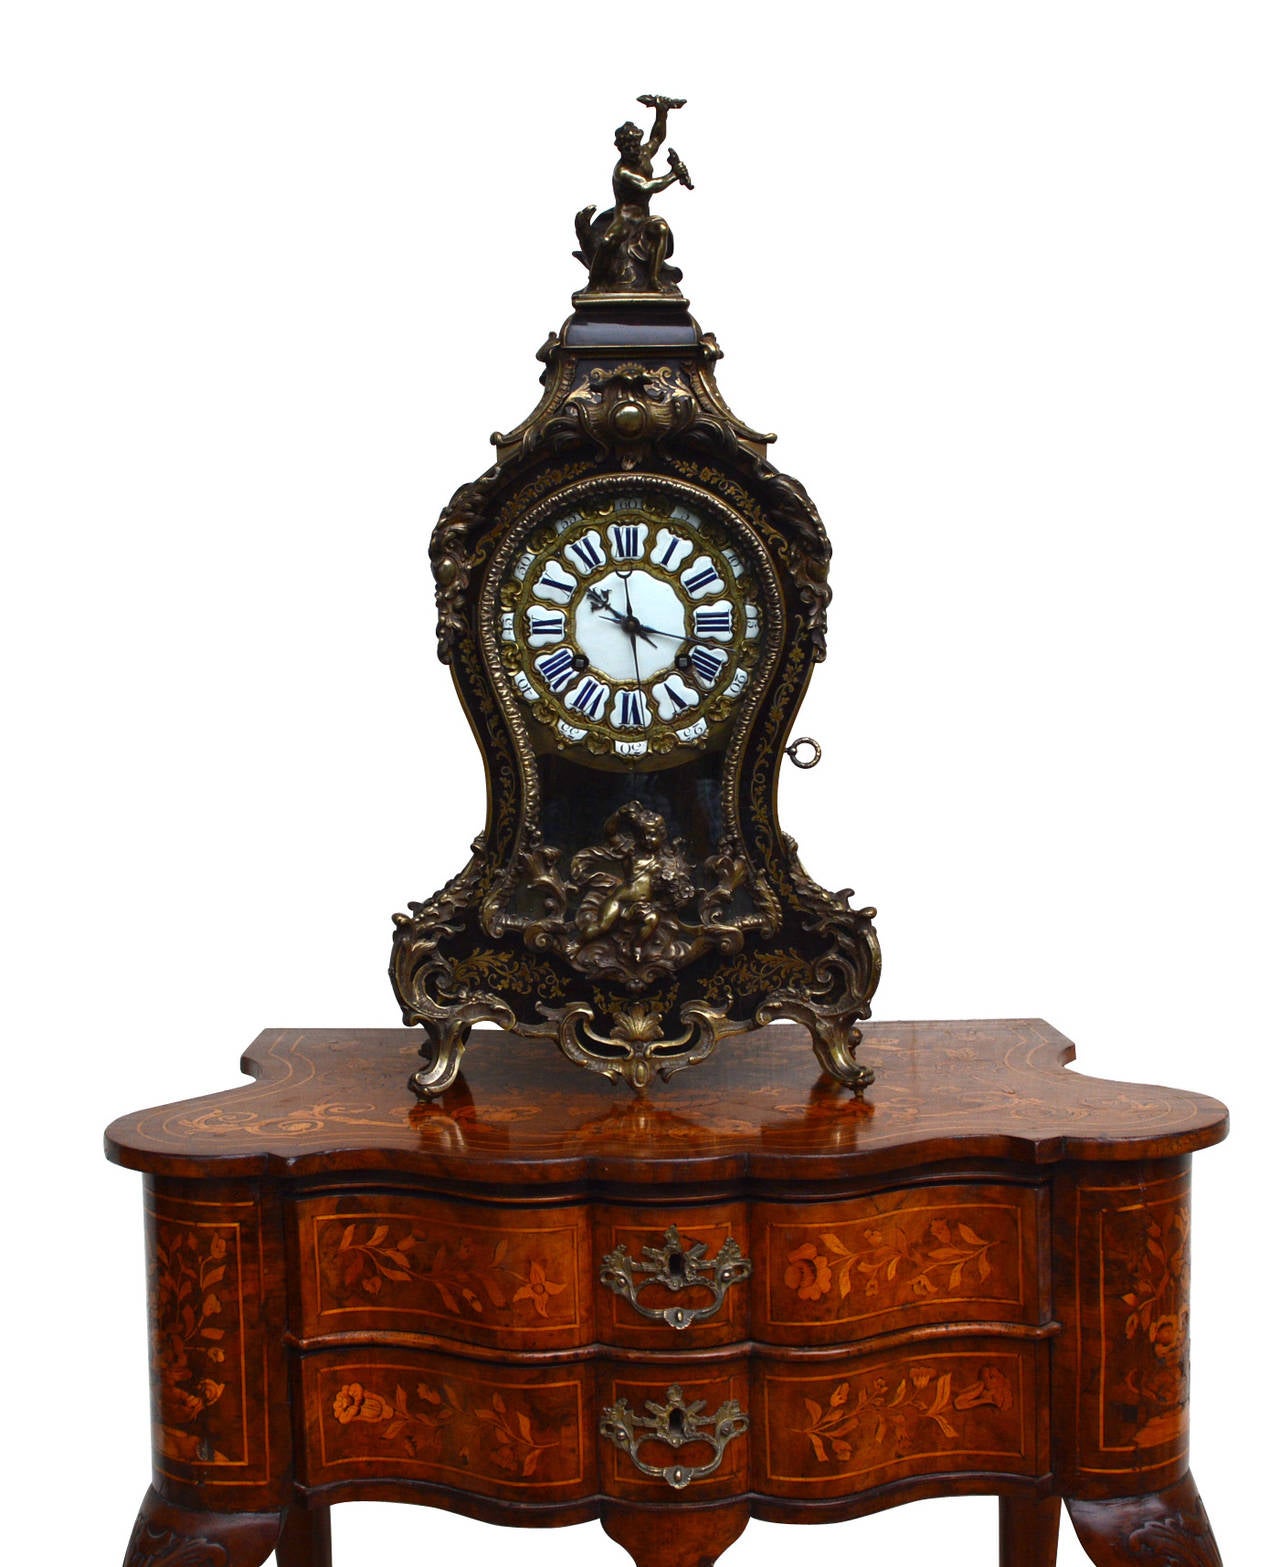 Rare Louis XV period table clock, by François Goyer, Paris 1750s.

Exquisite and very rare table clock, richly ornamented with floral elements, a putto, and an allegorical figure. Interior and back with intricate Boulle marquetries. 

Signature